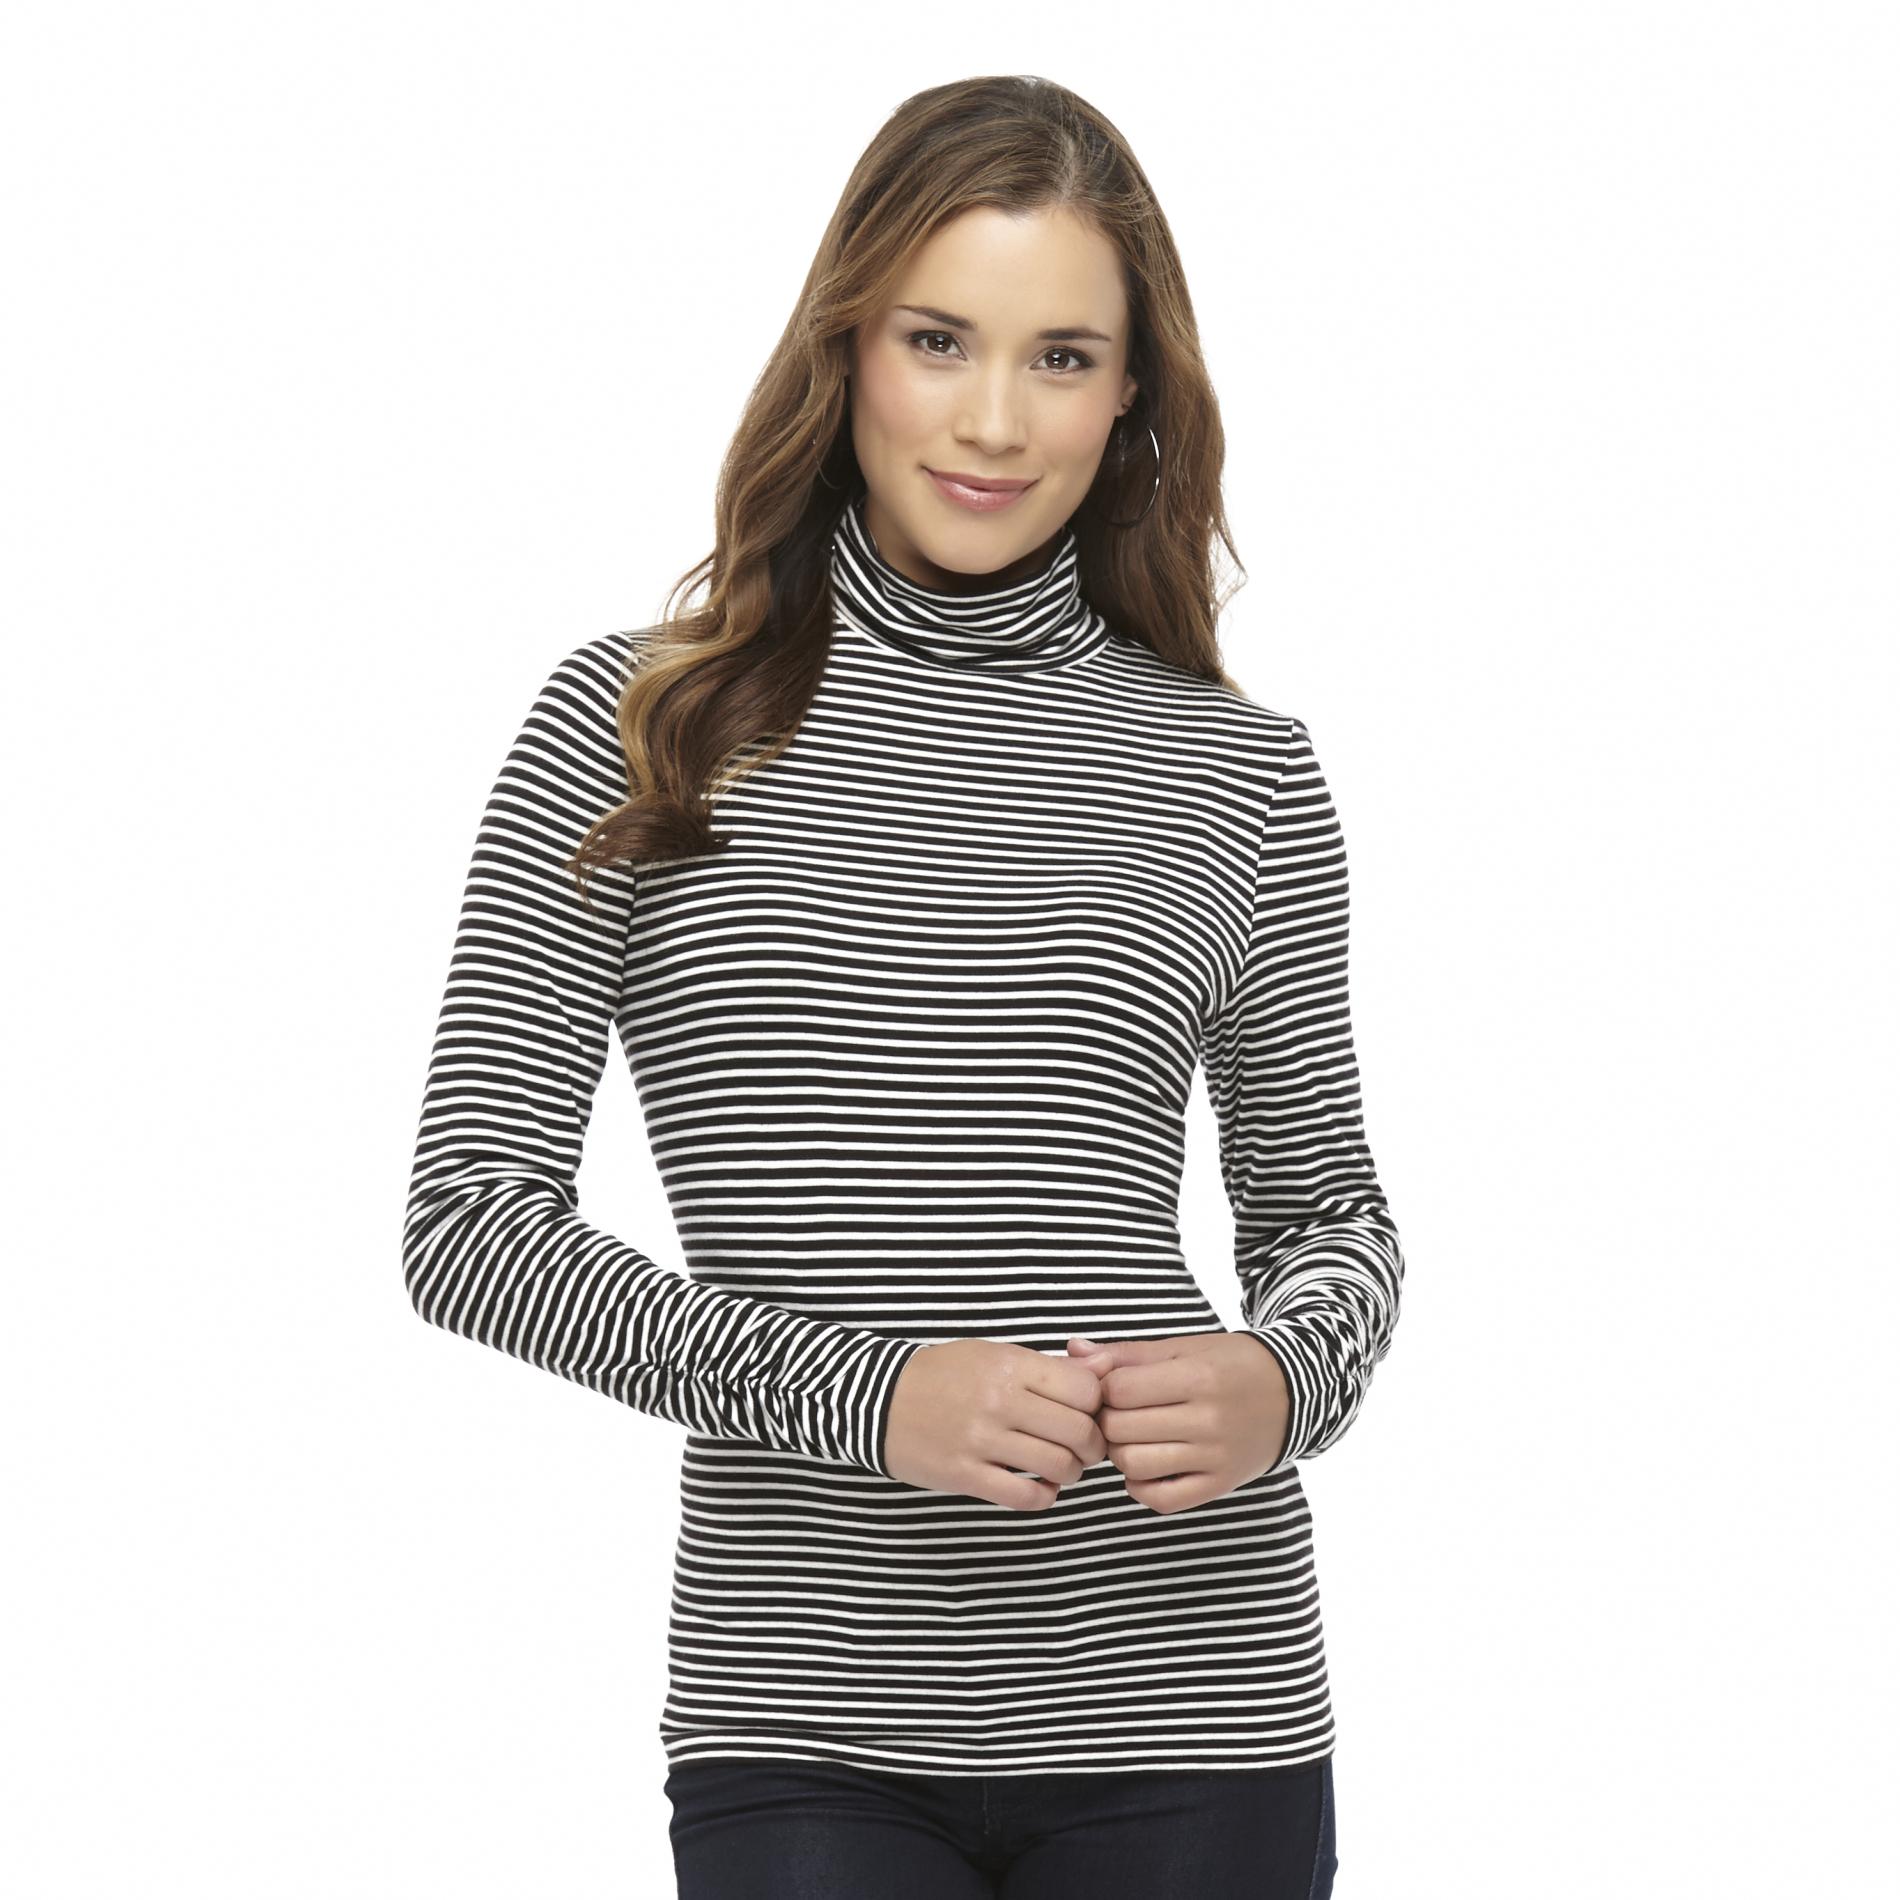 Attention Women's Ruched Turtleneck - Striped